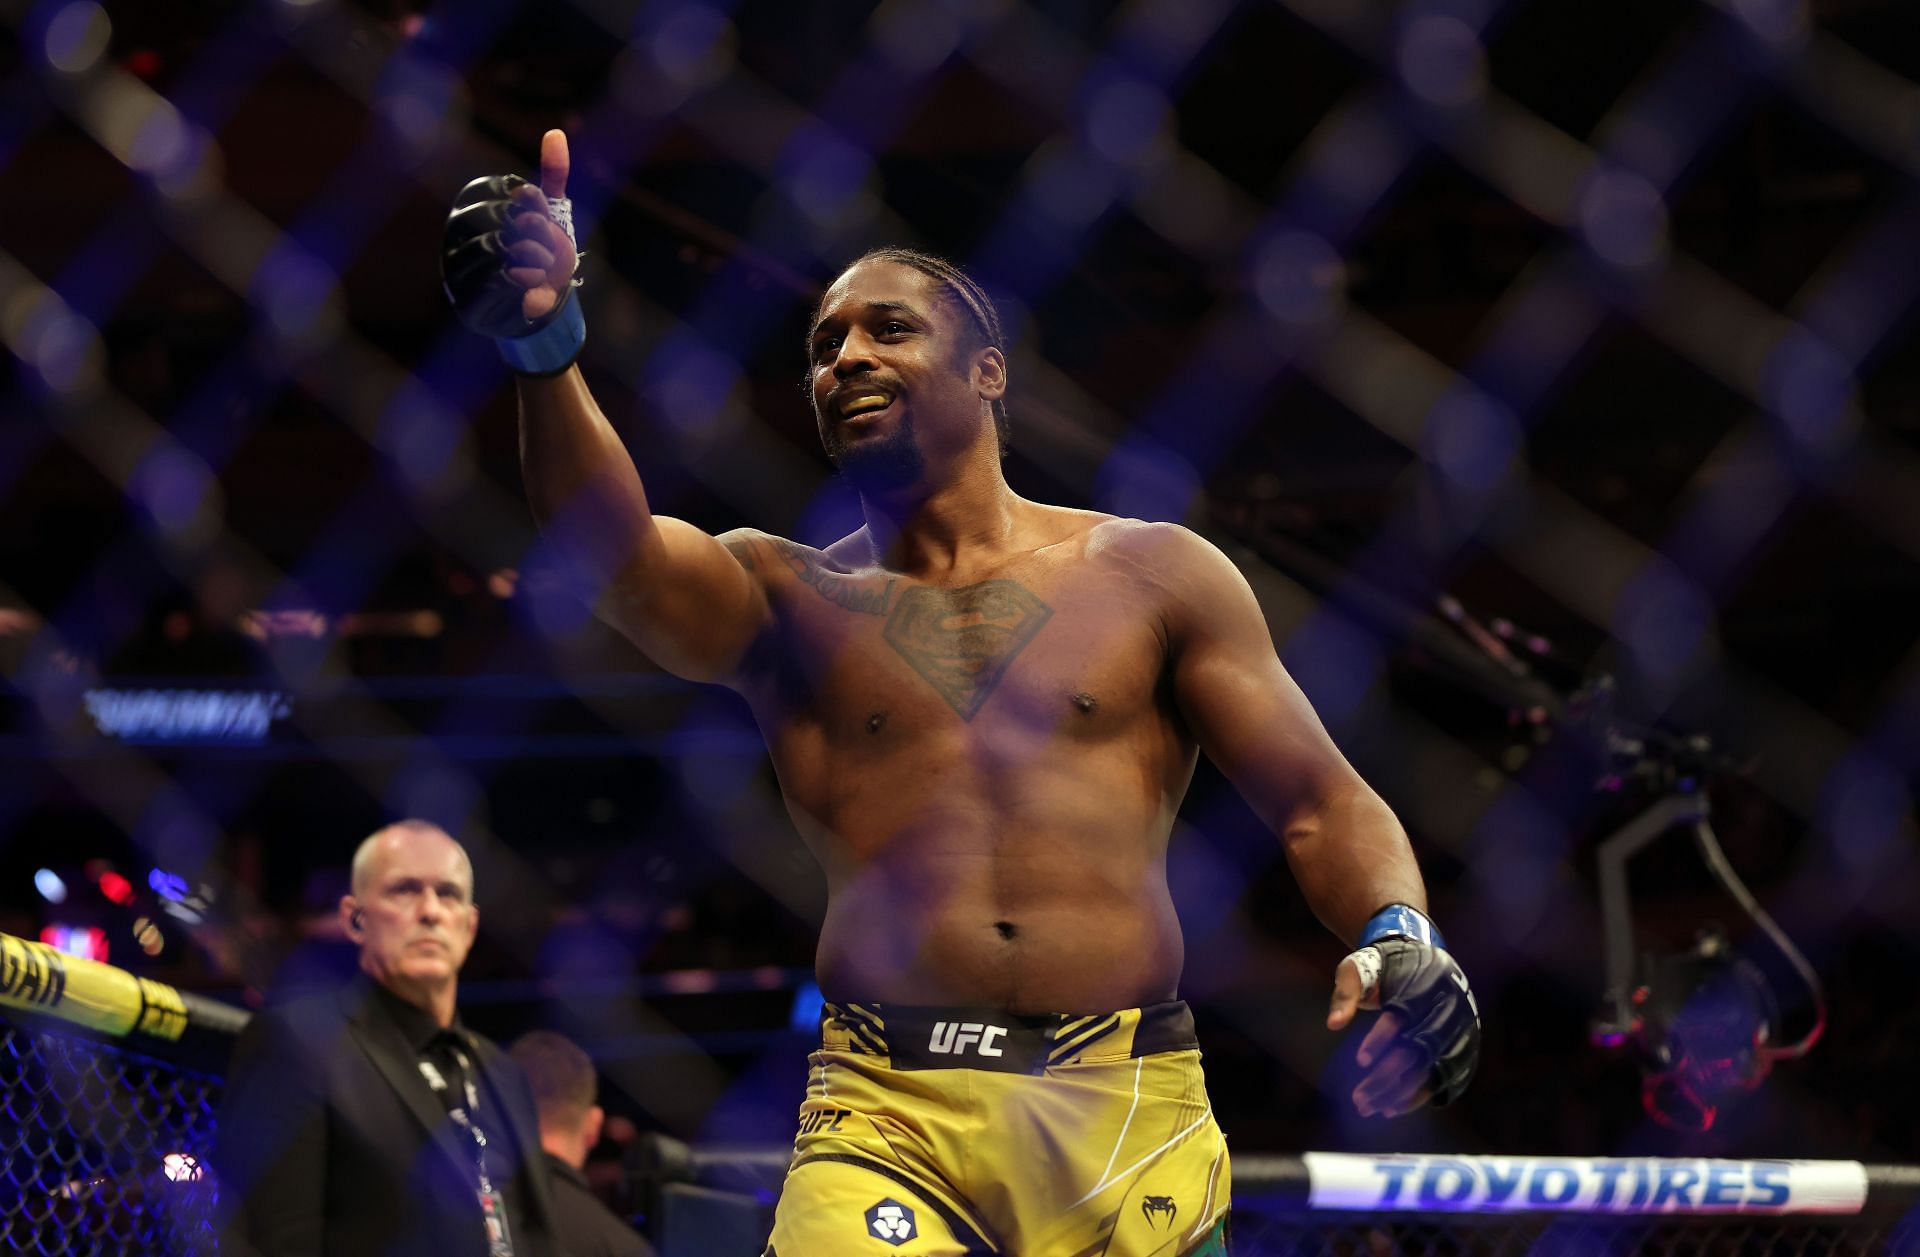 Ryan Spann is finally expected to face Nikita Krylov this weekend